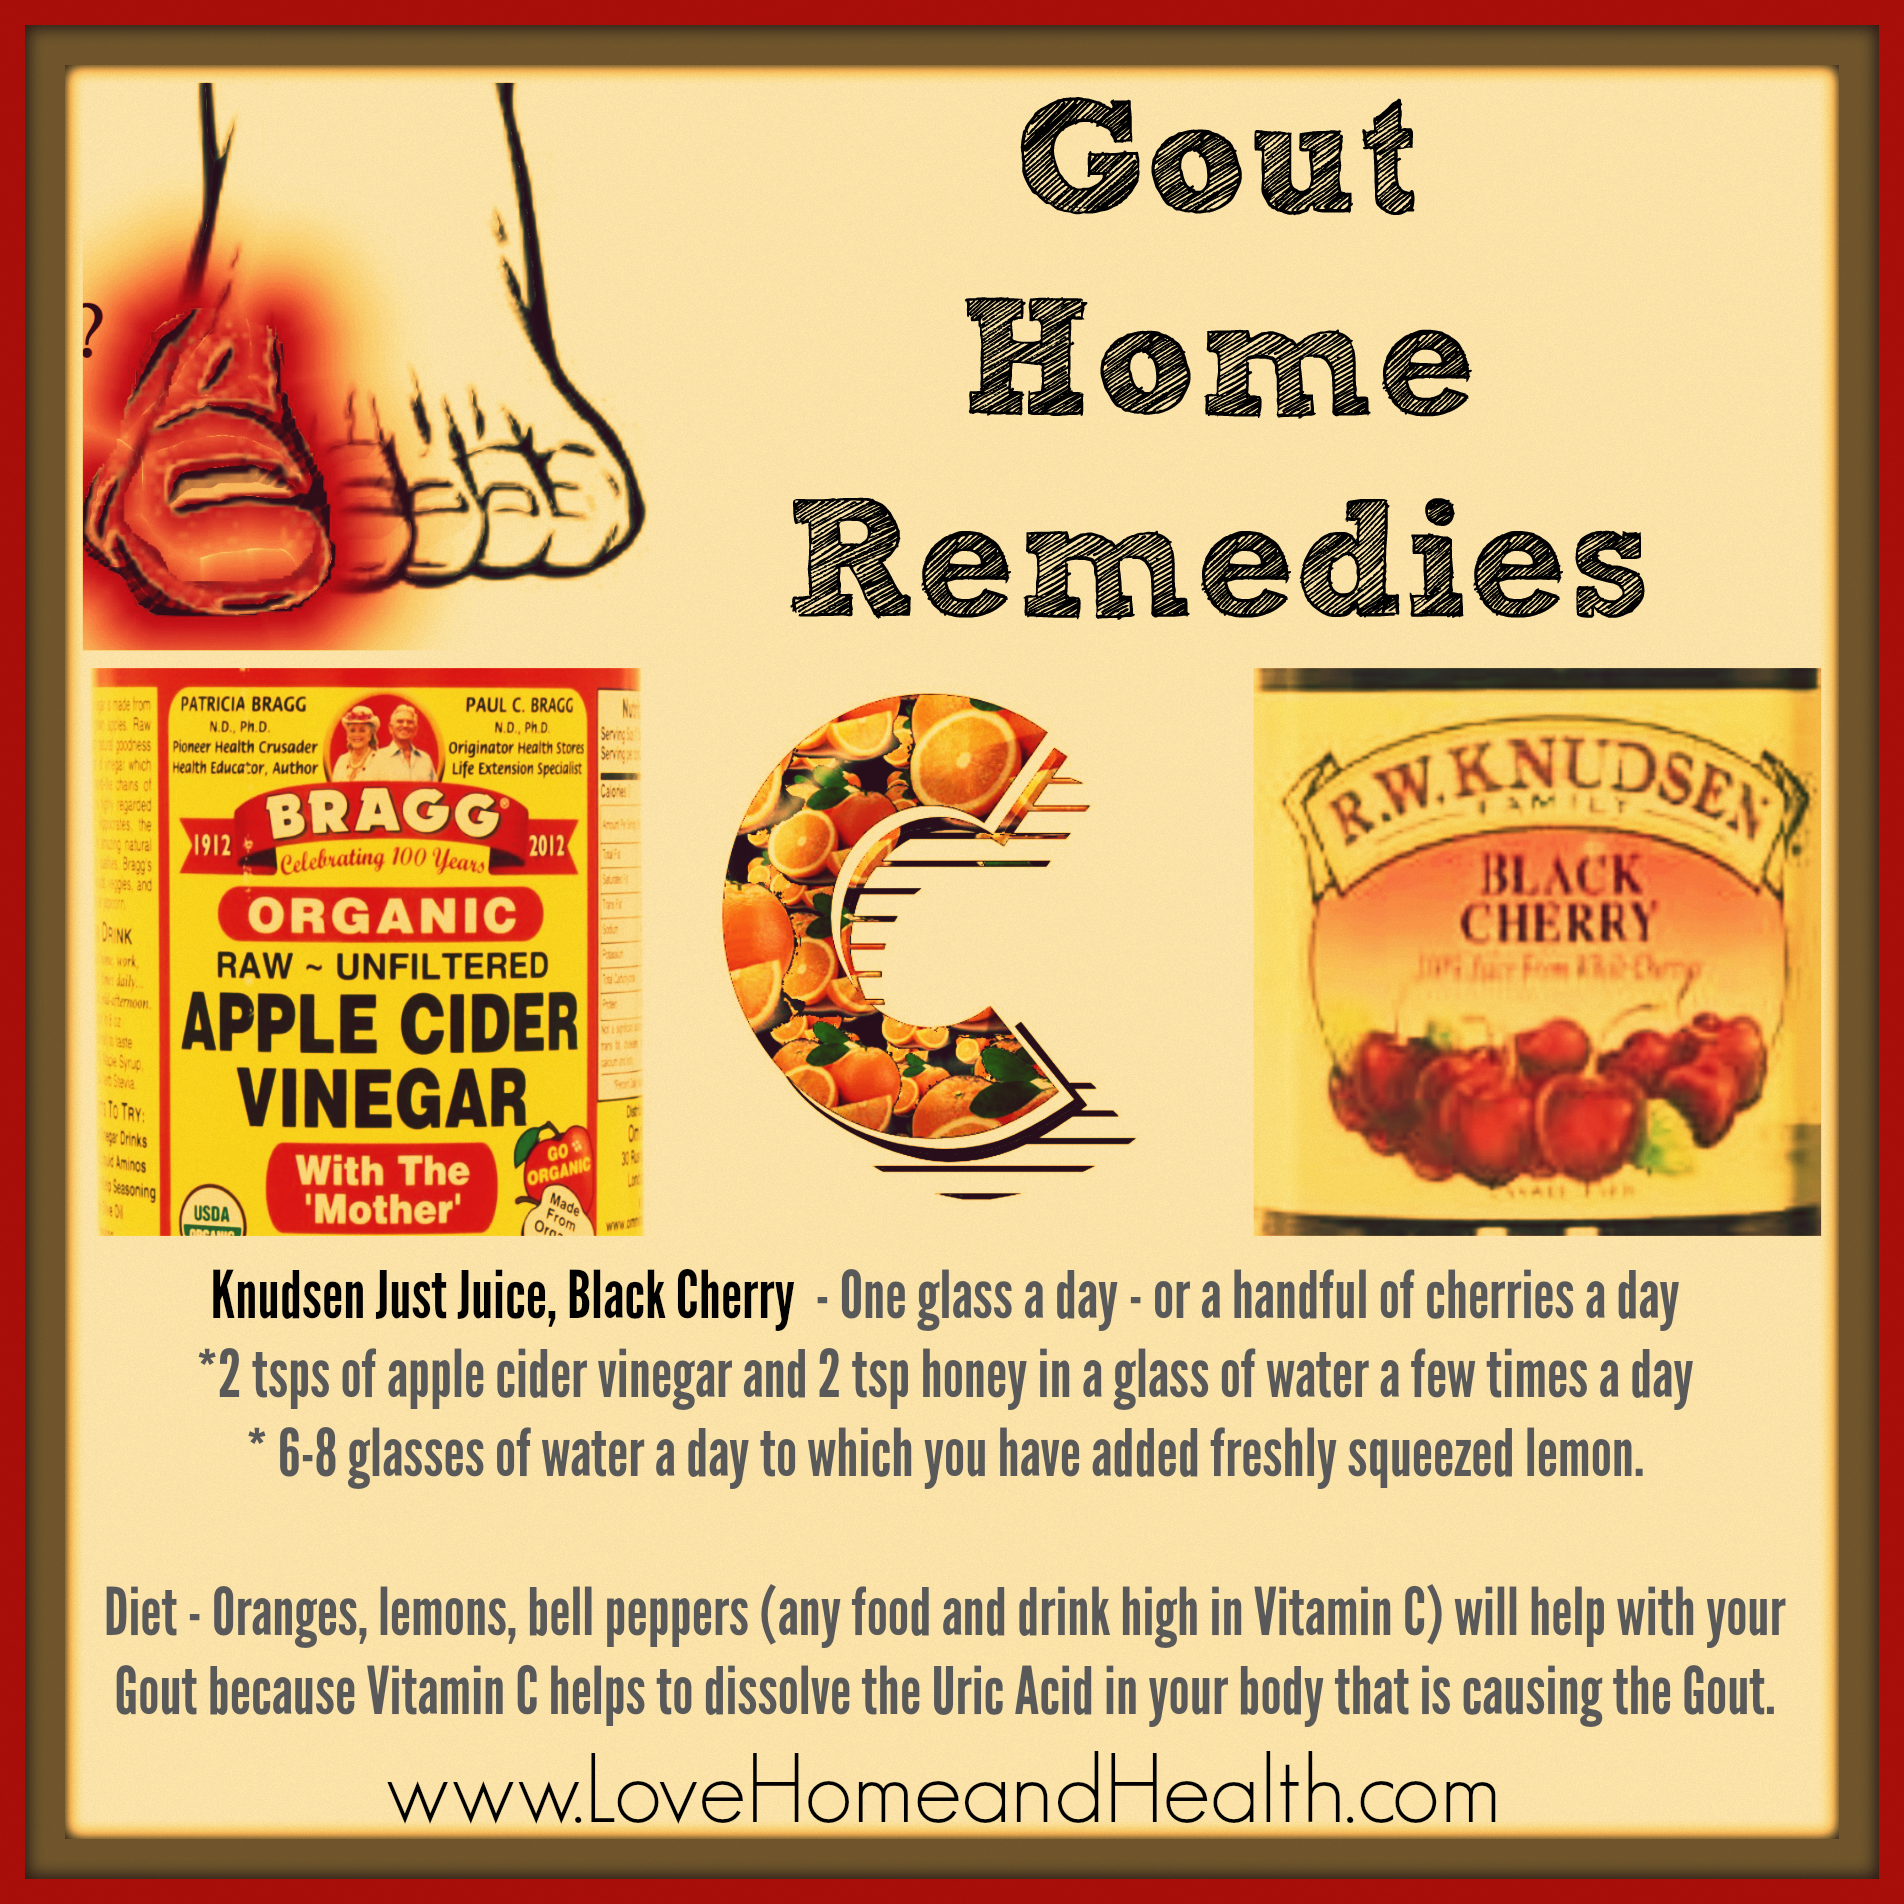 What are the best home remedies for gout?